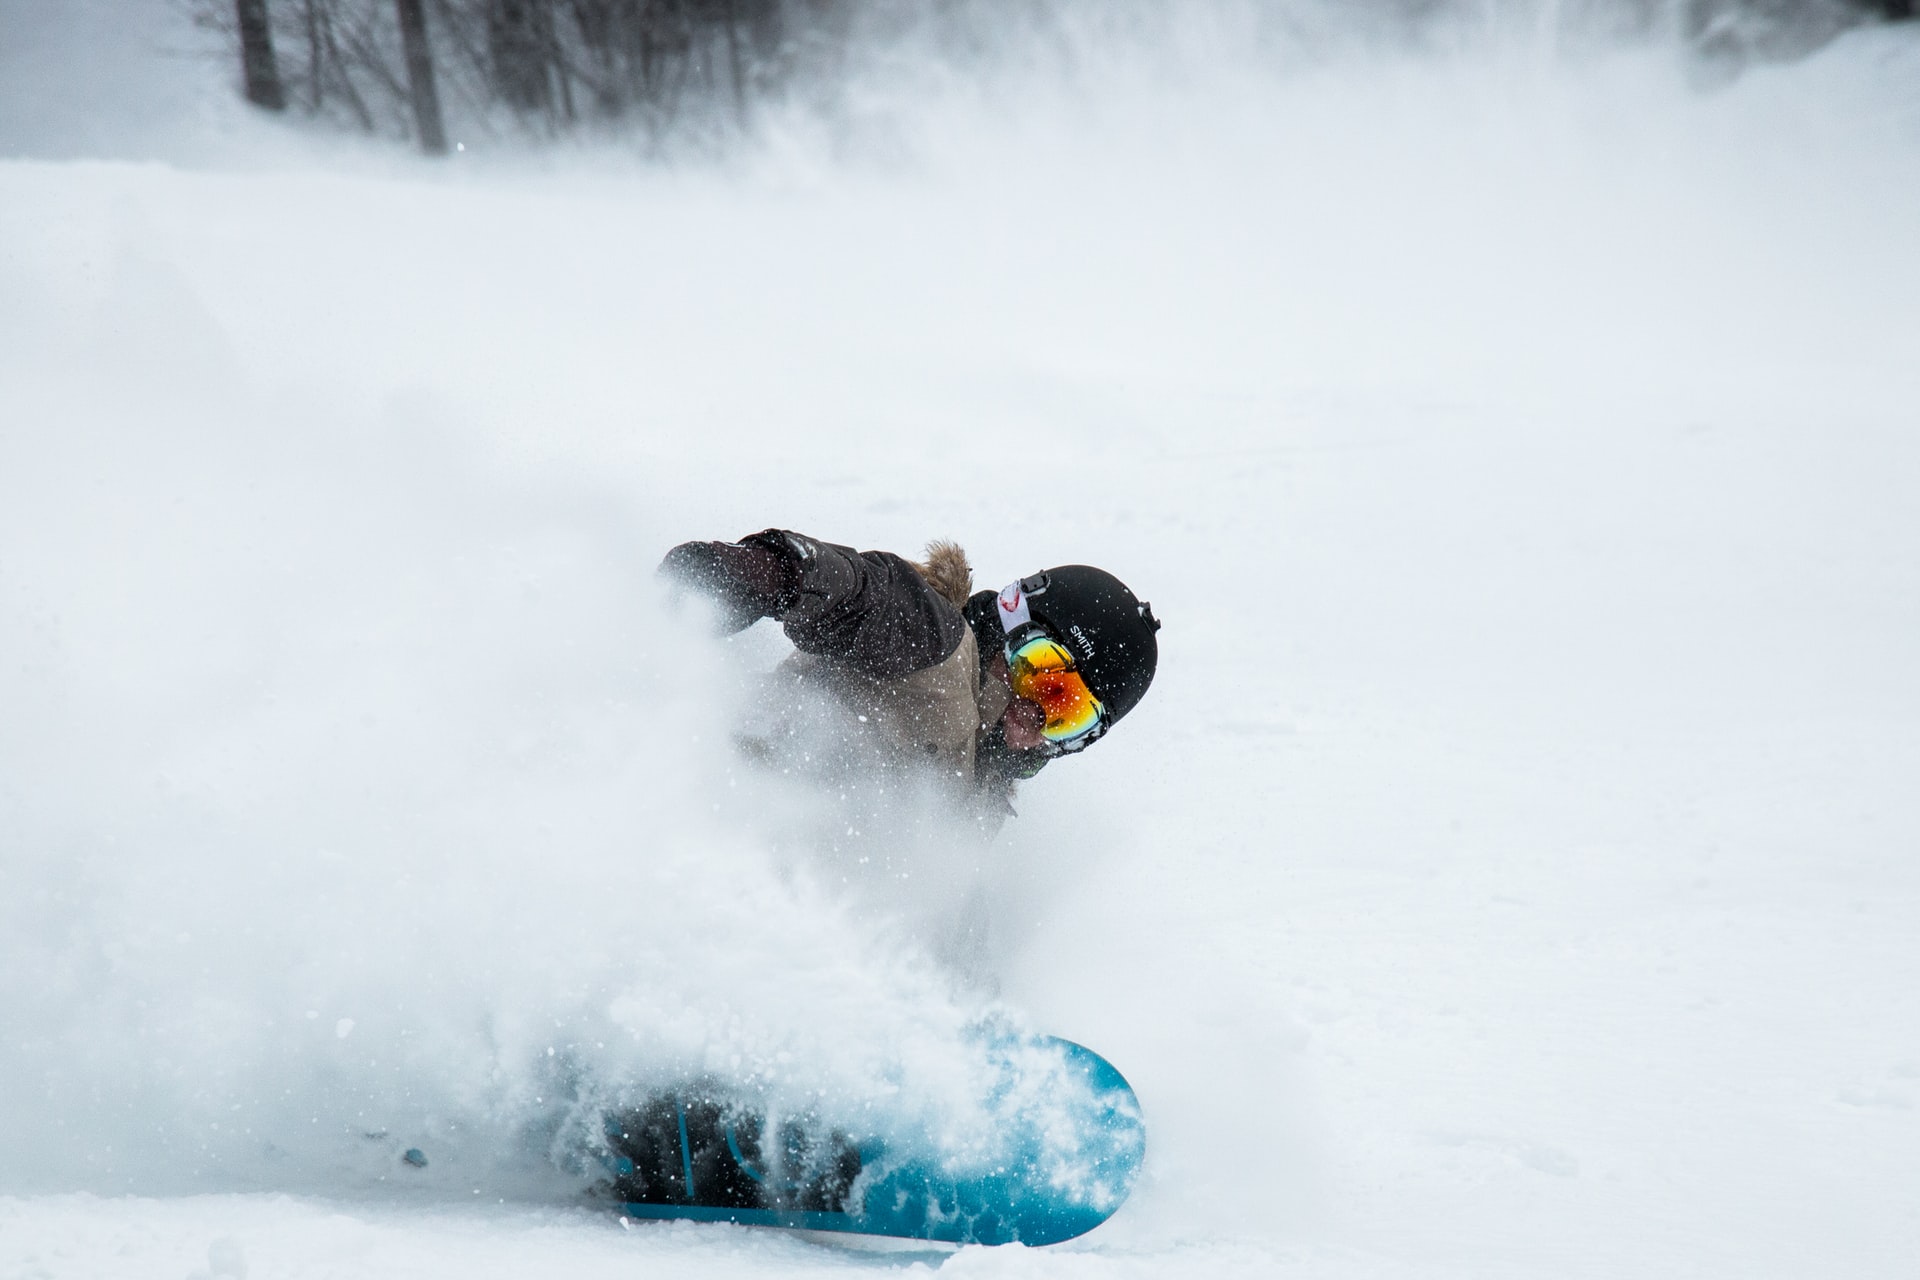 snowboarder carving in the snow in new hampshire